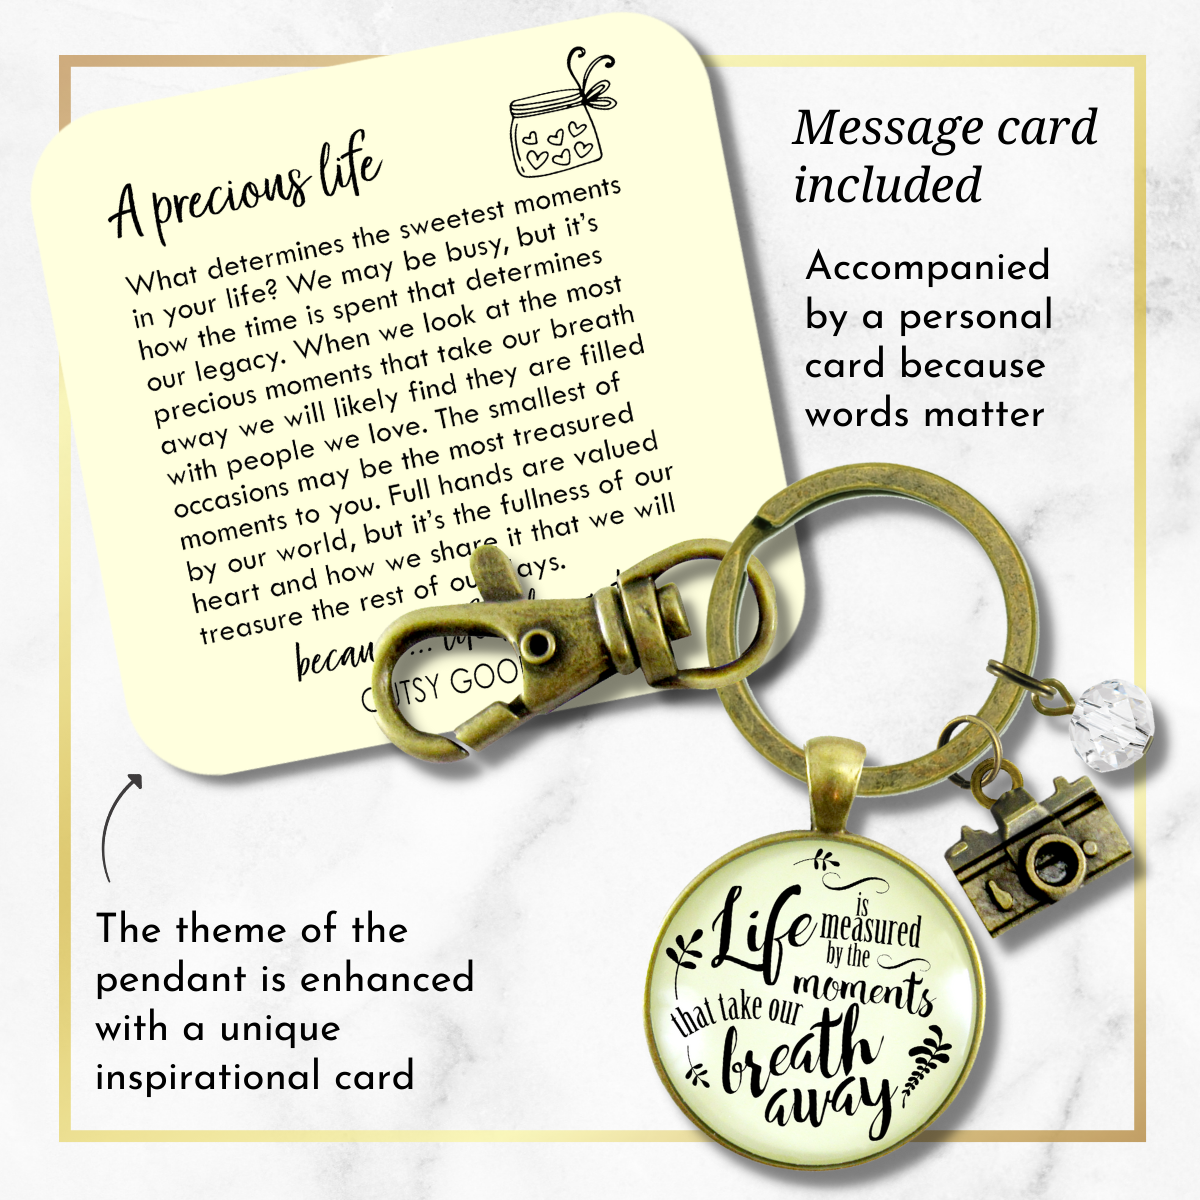 Life Keychain Measured By Moments That Take Our Breath Away Memories Jewelry Camera - Gutsy Goodness Handmade Jewelry;Life Keychain Measured By Moments That Take Our Breath Away Memories Jewelry Camera - Gutsy Goodness Handmade Jewelry Gifts